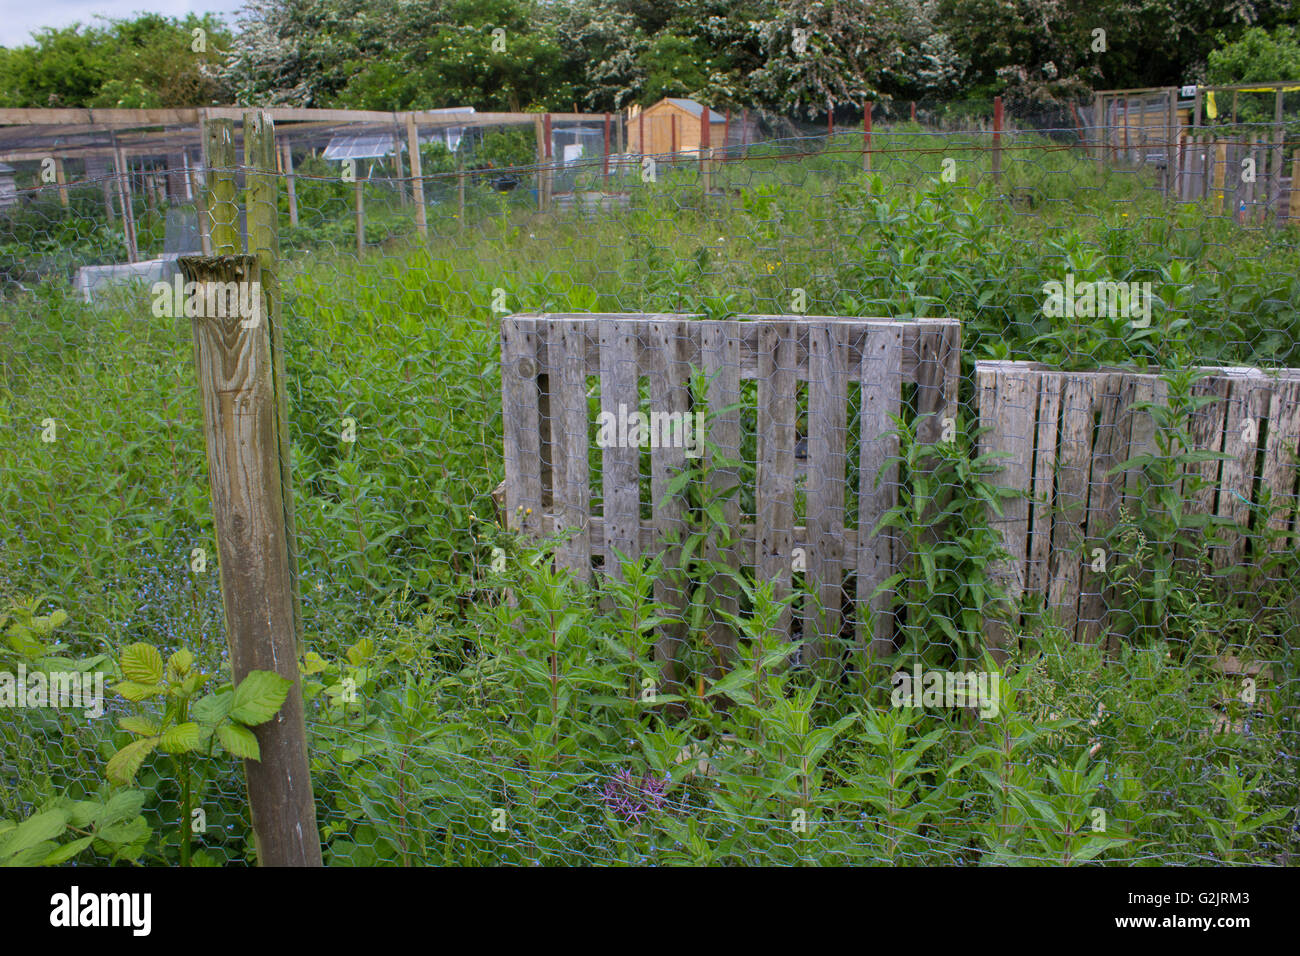 An allotment site in Abingdon, Oxfordshire, overgrown with weeds and nettles. Stock Photo